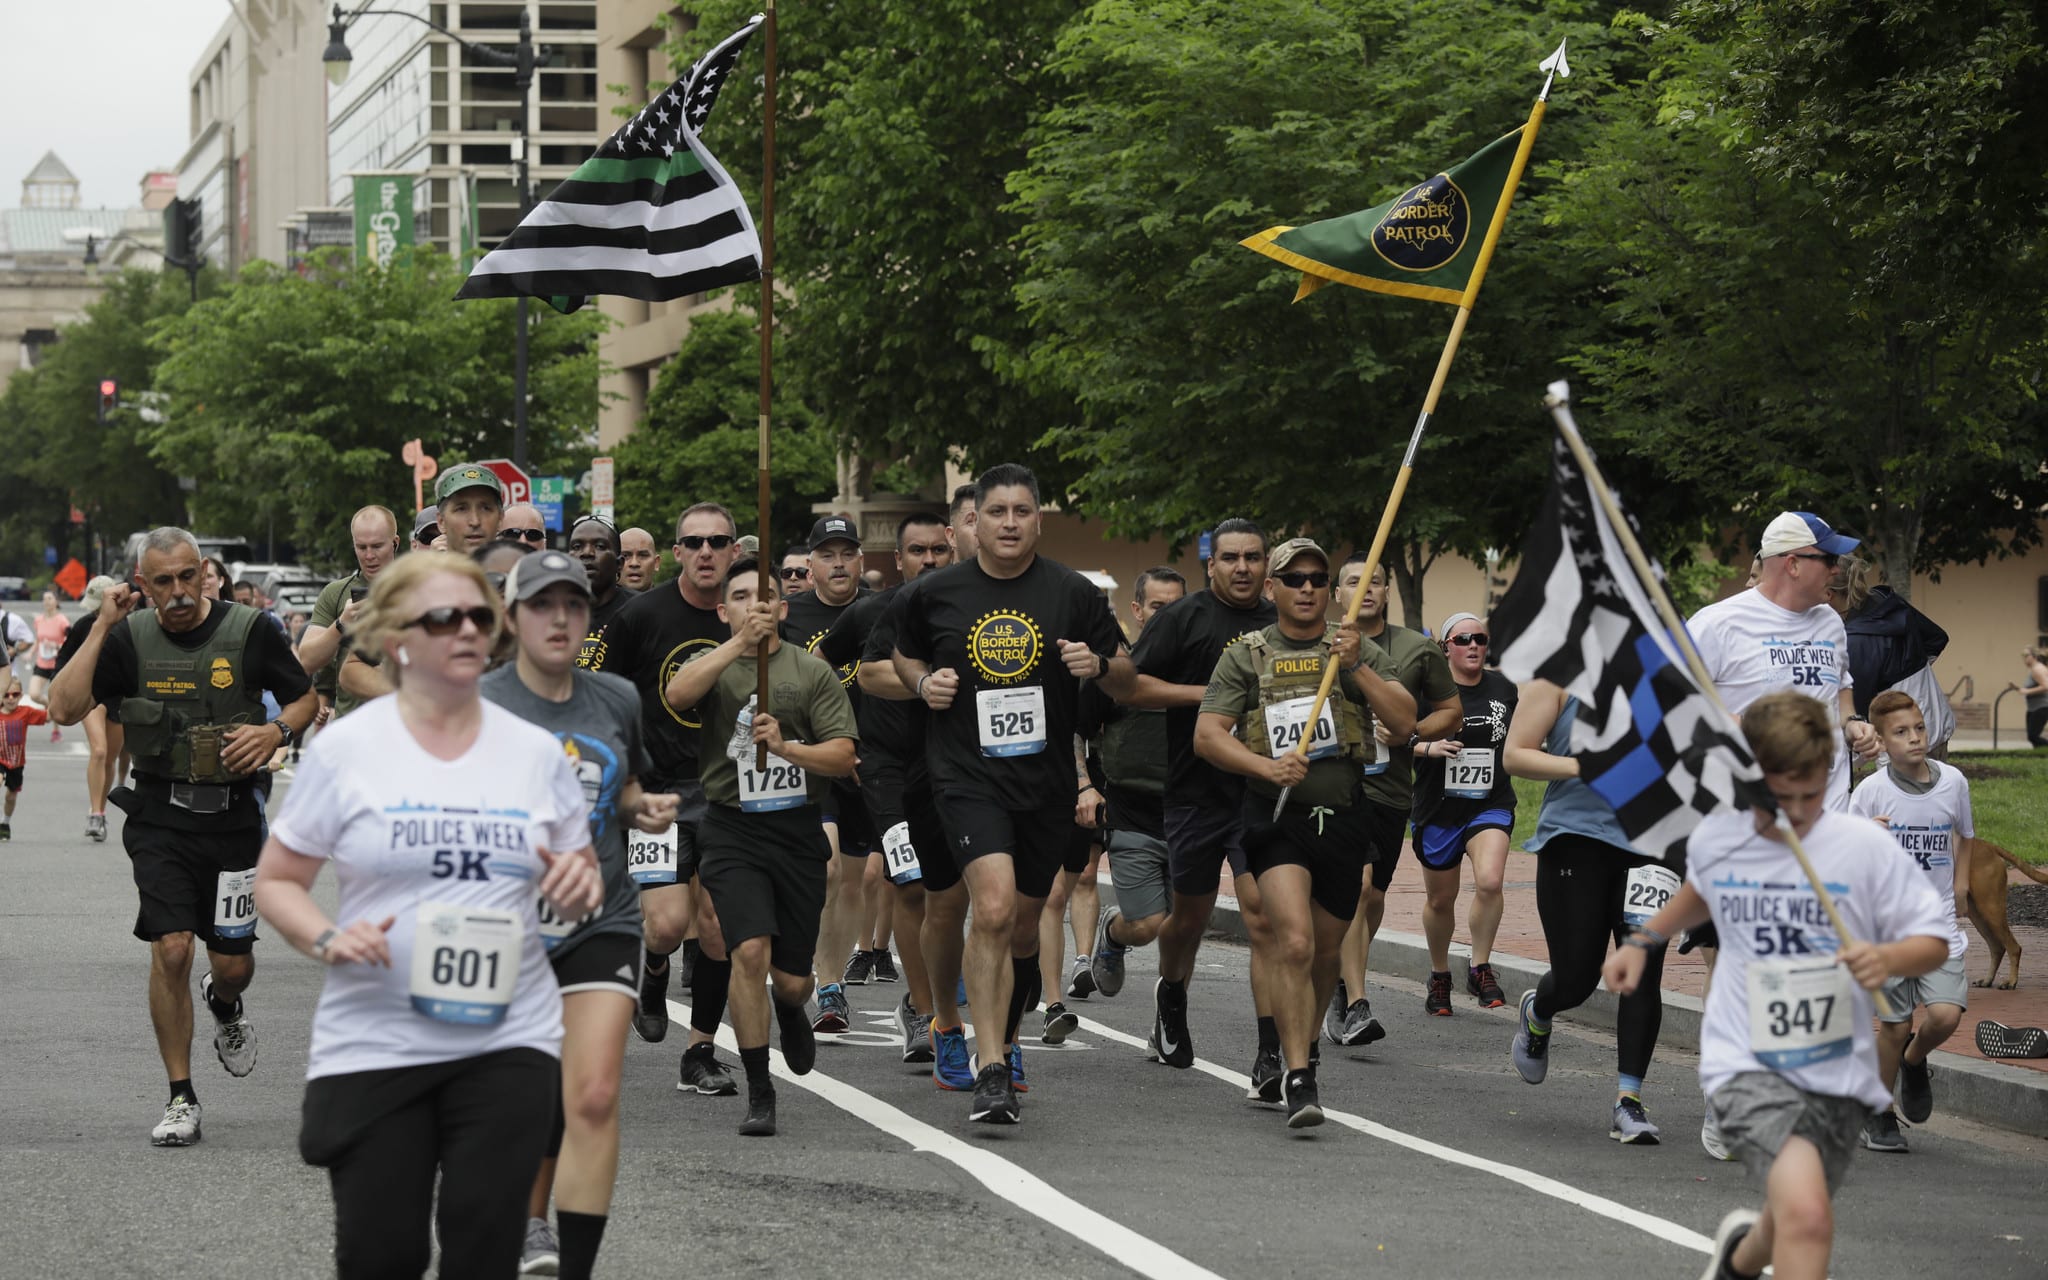 NATIONAL POLICE WEEK: CBP Hits the Pavement for Memorial 5K Homeland Security Today